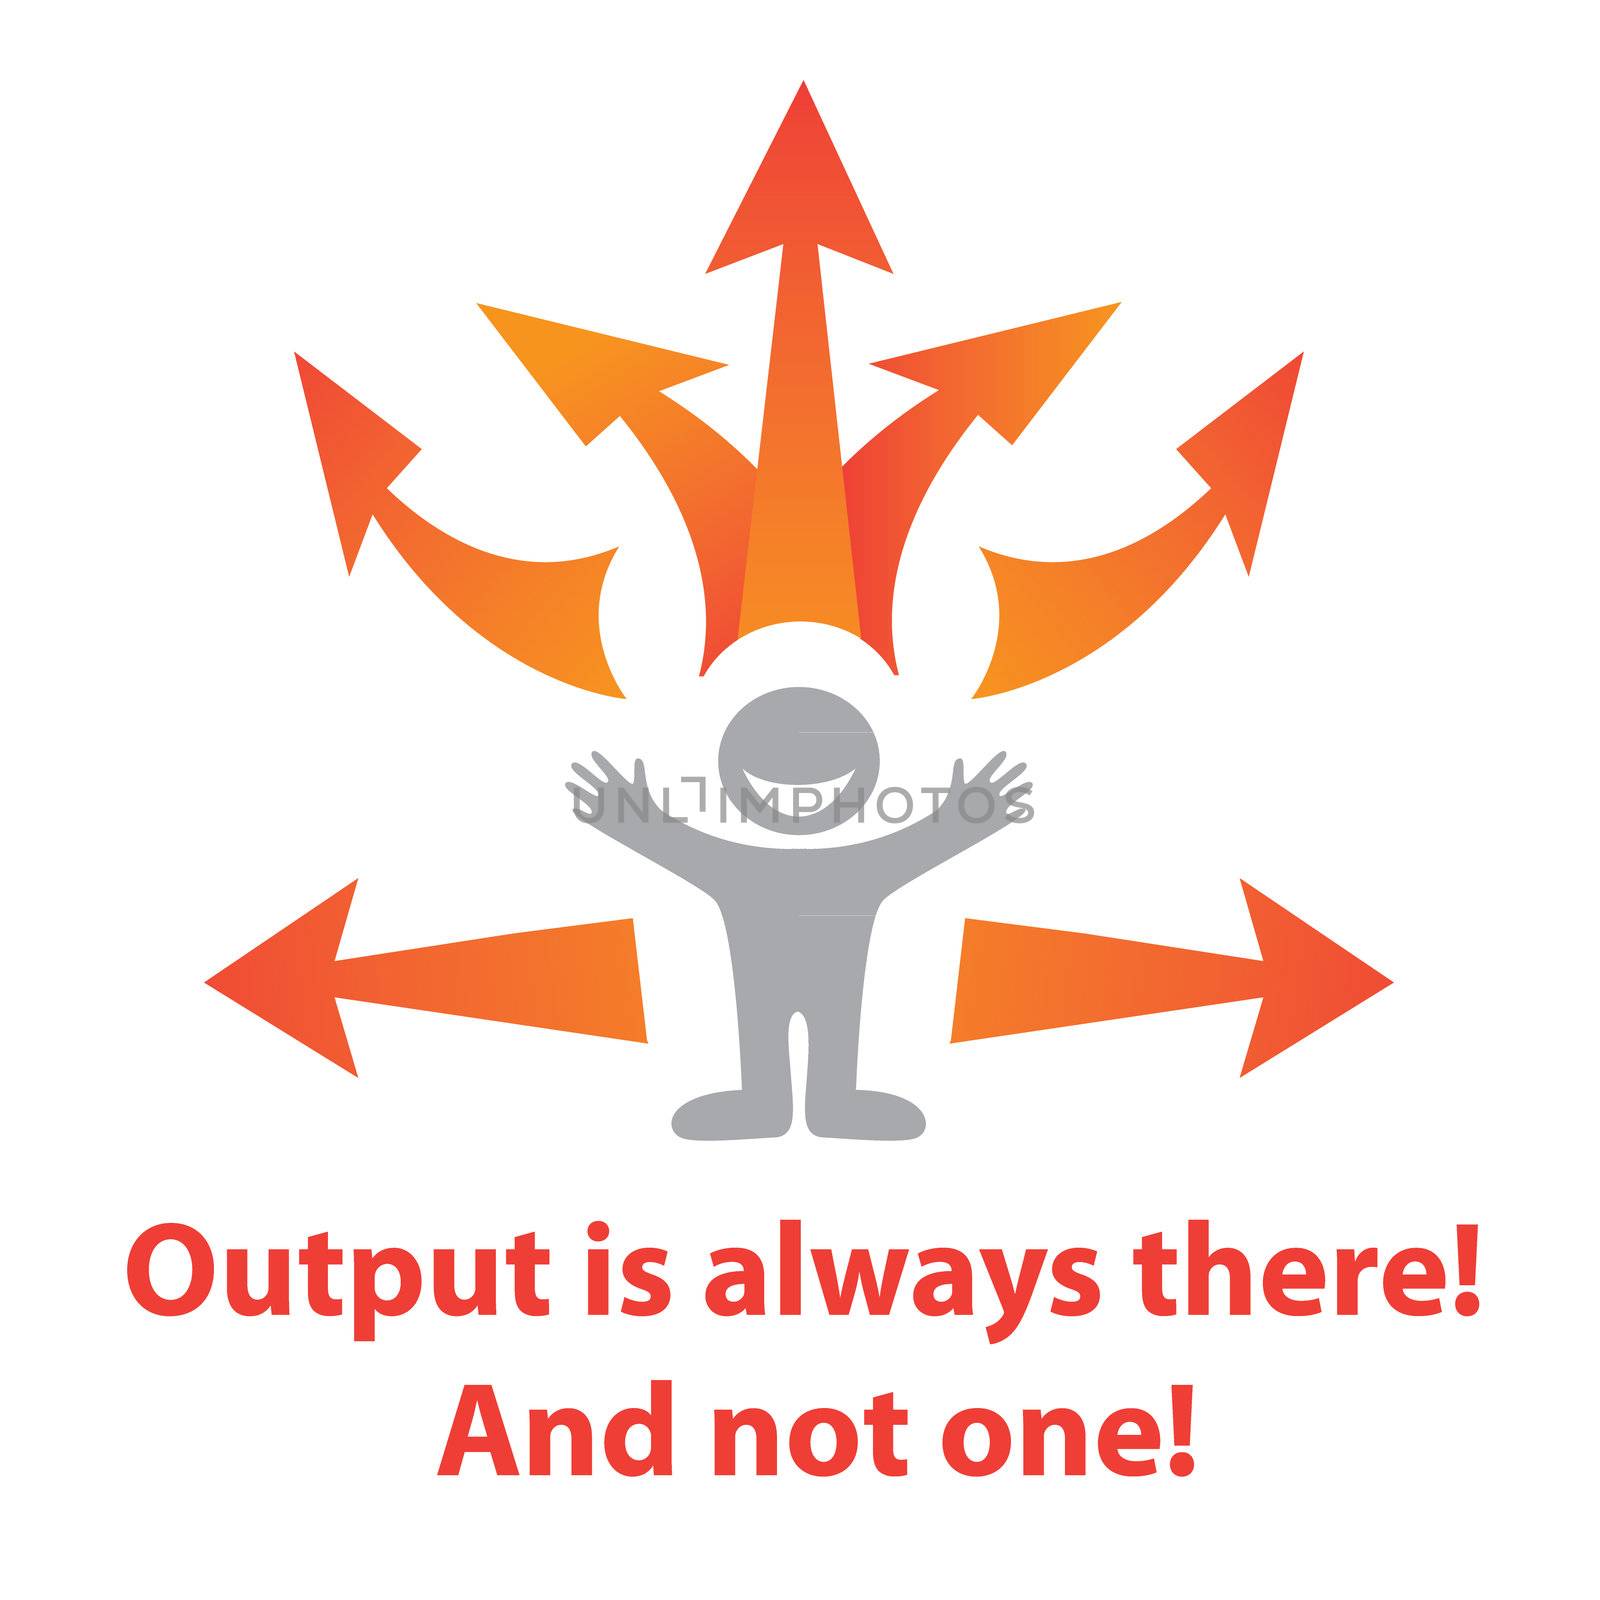 Output is always there! And not one! - Vector illustration - the possible ways out